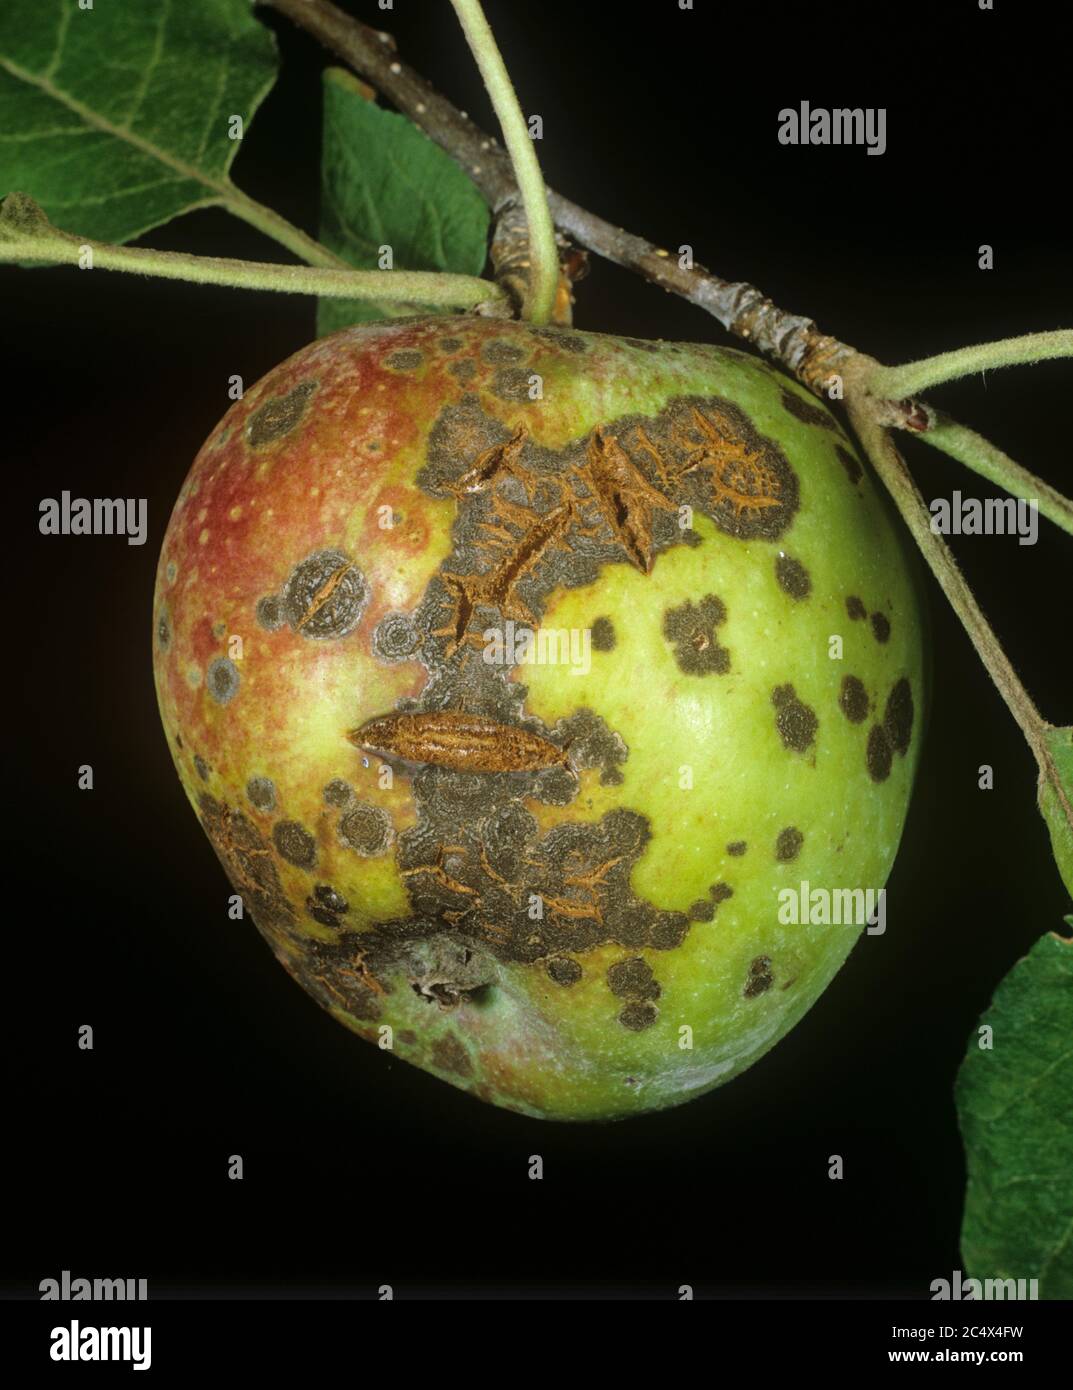 Apple scab (Venturia inaequalis) lesions and cracking on ripe on apple fruit, New York State, USA, September Stock Photo